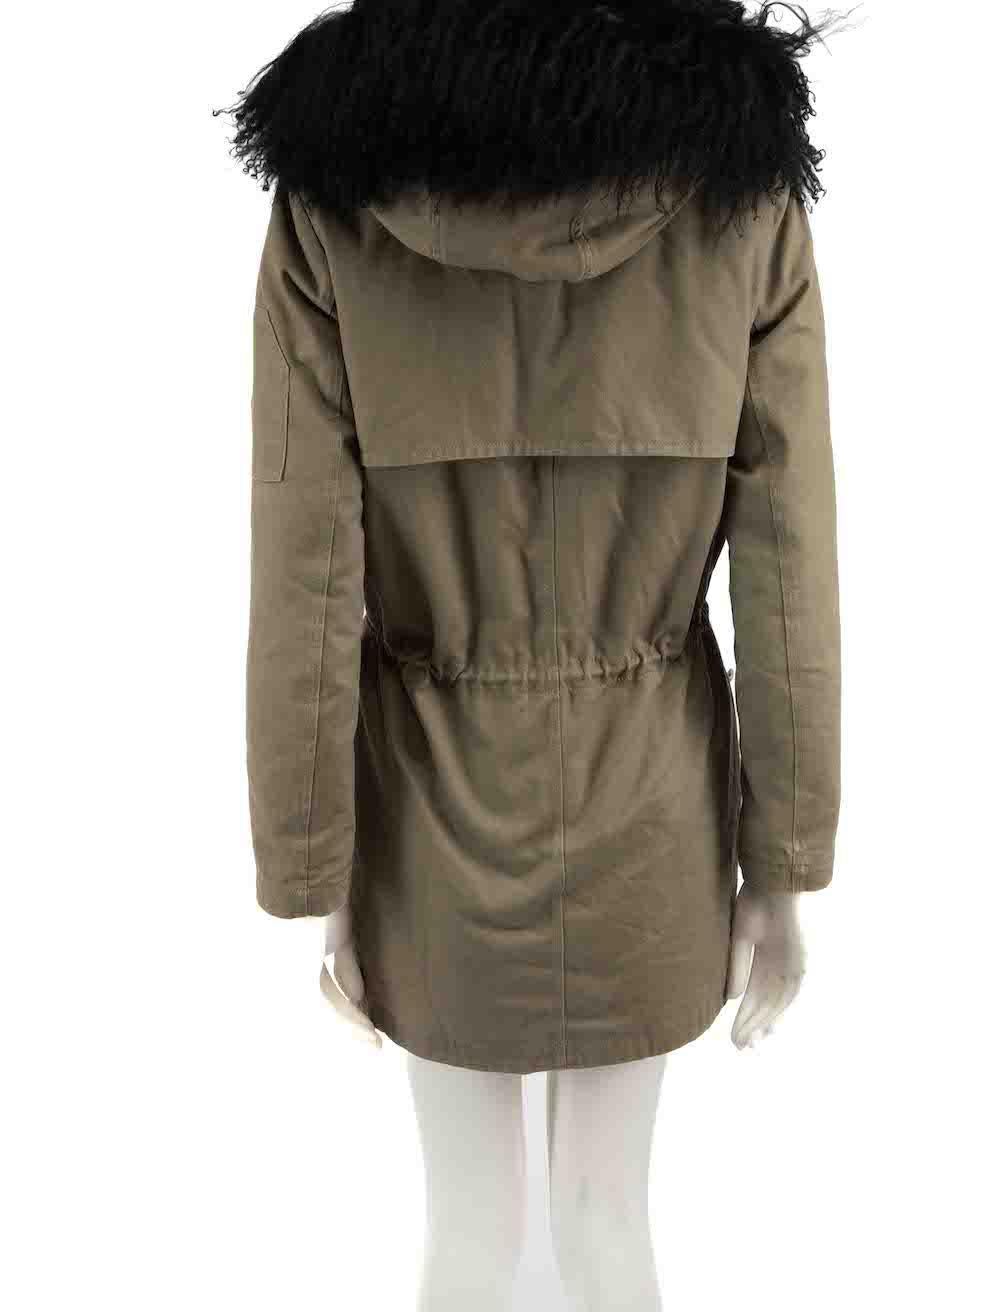 Maje Khaki Faux Fur Lined Parka Coat Size S In Good Condition For Sale In London, GB